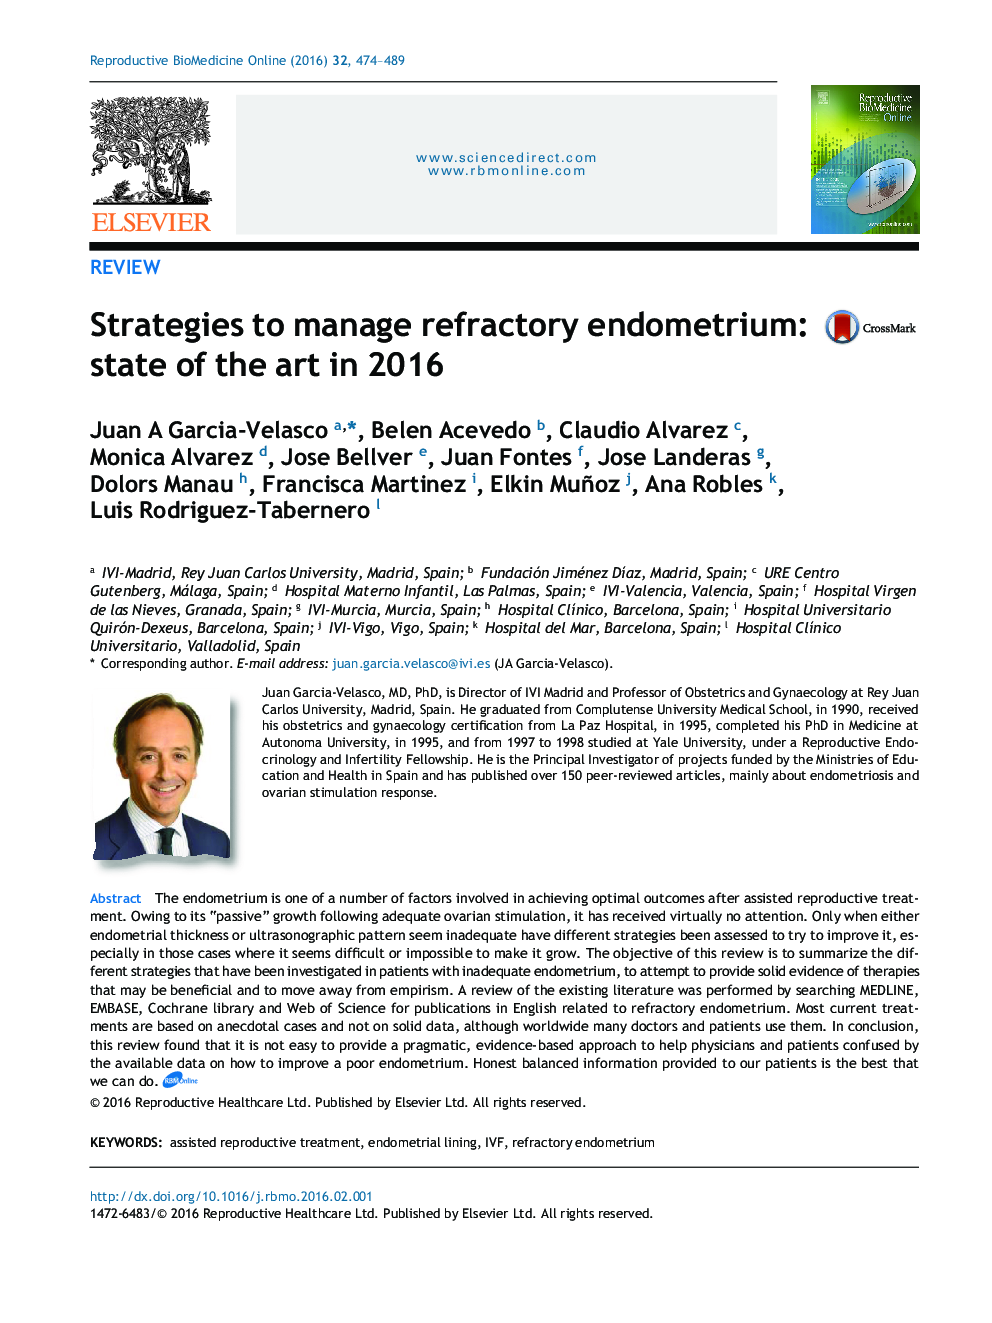 Strategies to manage refractory endometrium: state of the art in 2016